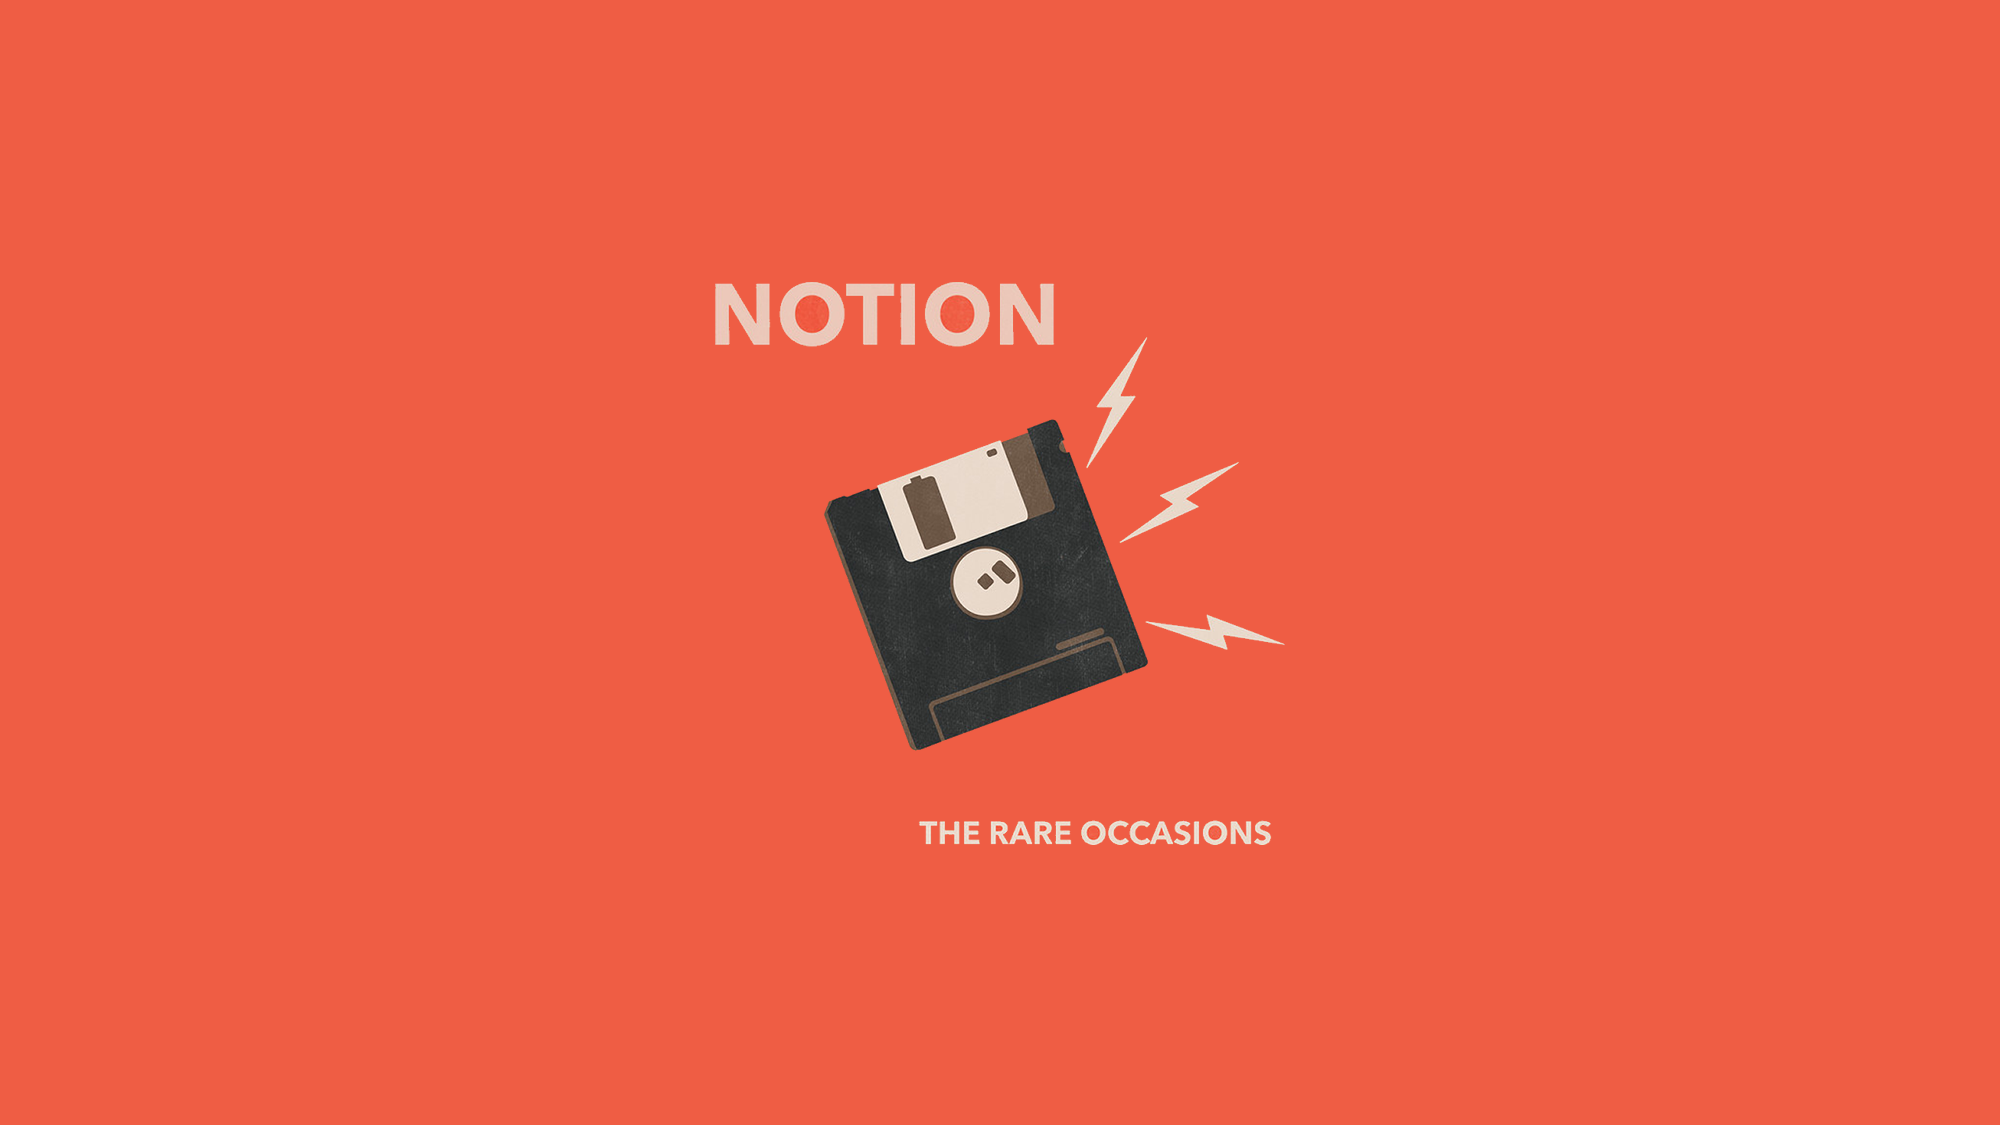 [JukeBox] #3 - Notion - The Rare Occasions